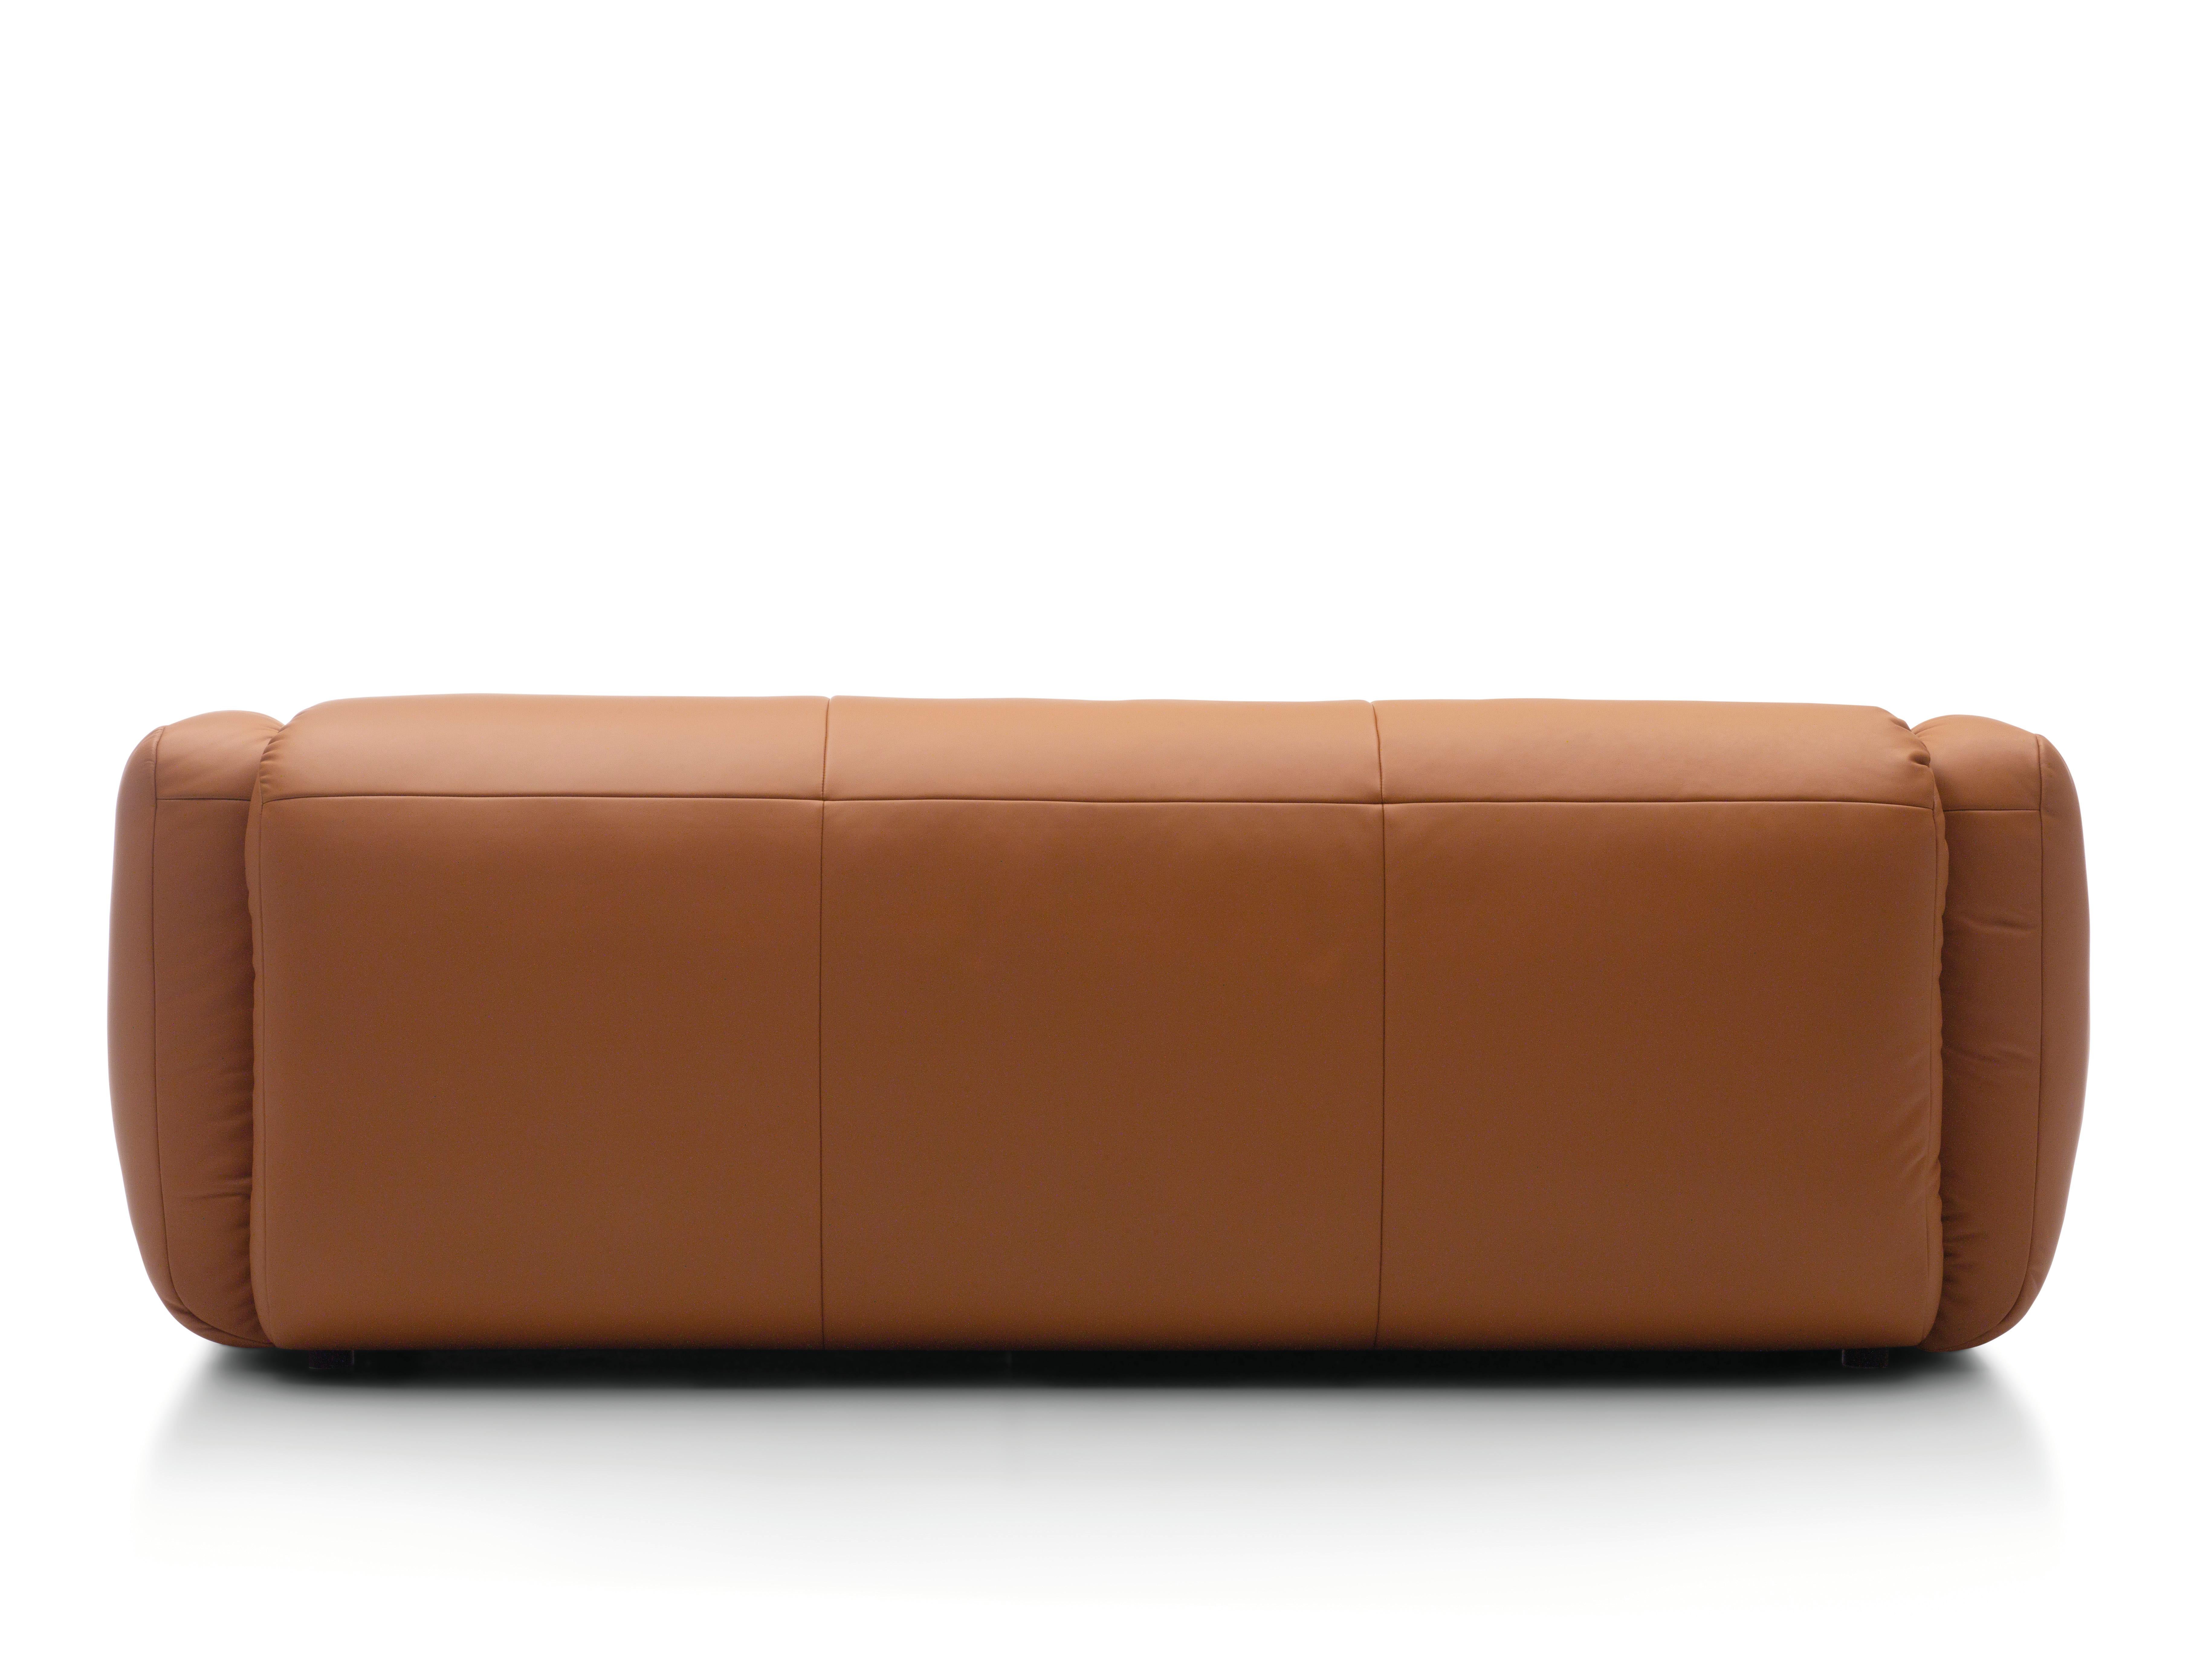 Swiss De Sede DS-705 Sofa by Philippe Malouin For Sale